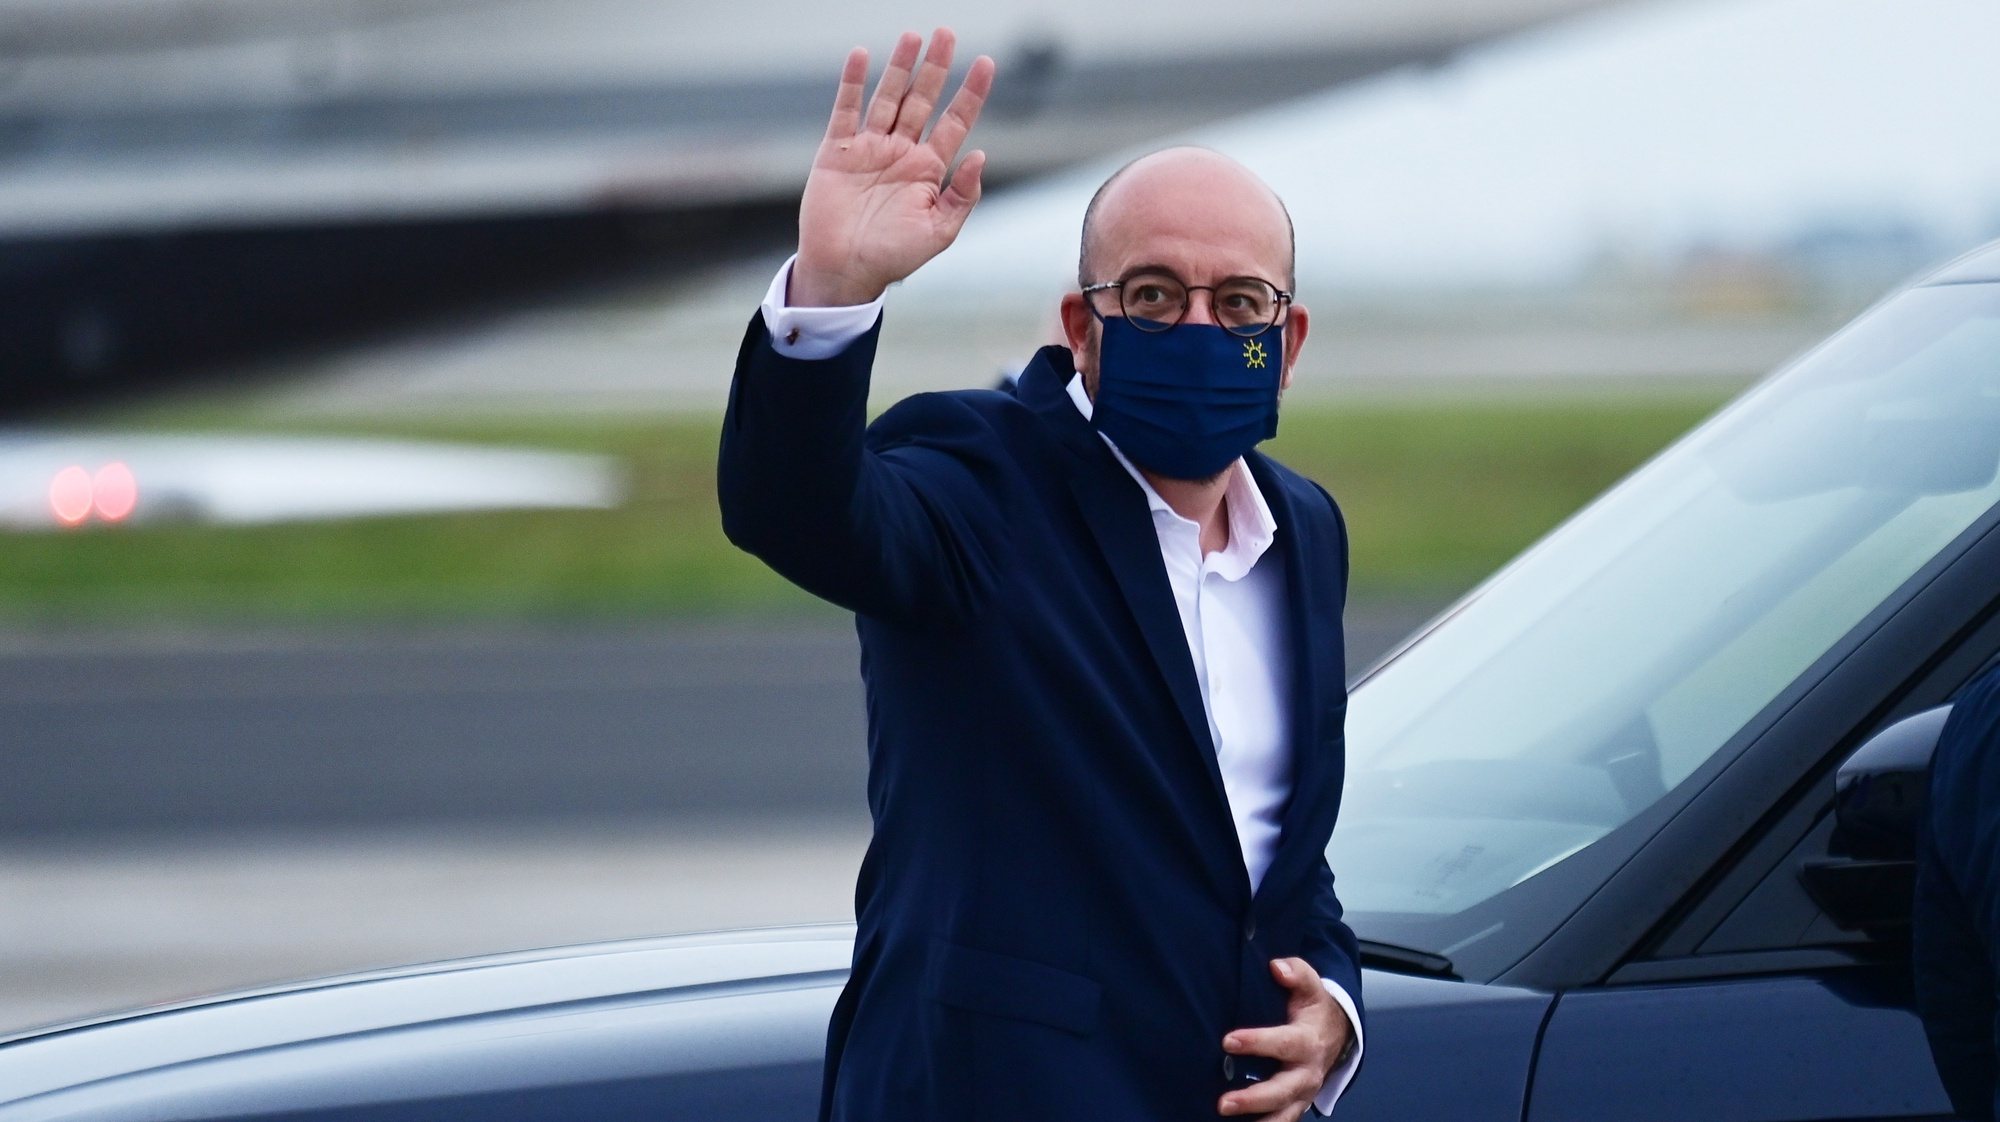 epa09260228 European Council President Charles Michel, arrives ahead of the G7 Summit at Cornwall airport in Newquay, Britain, 10 June 2021. Britain will hold the G7 summit in Cornwall from 11 to 13 June 2021.  EPA/NEIL HALL/POOL